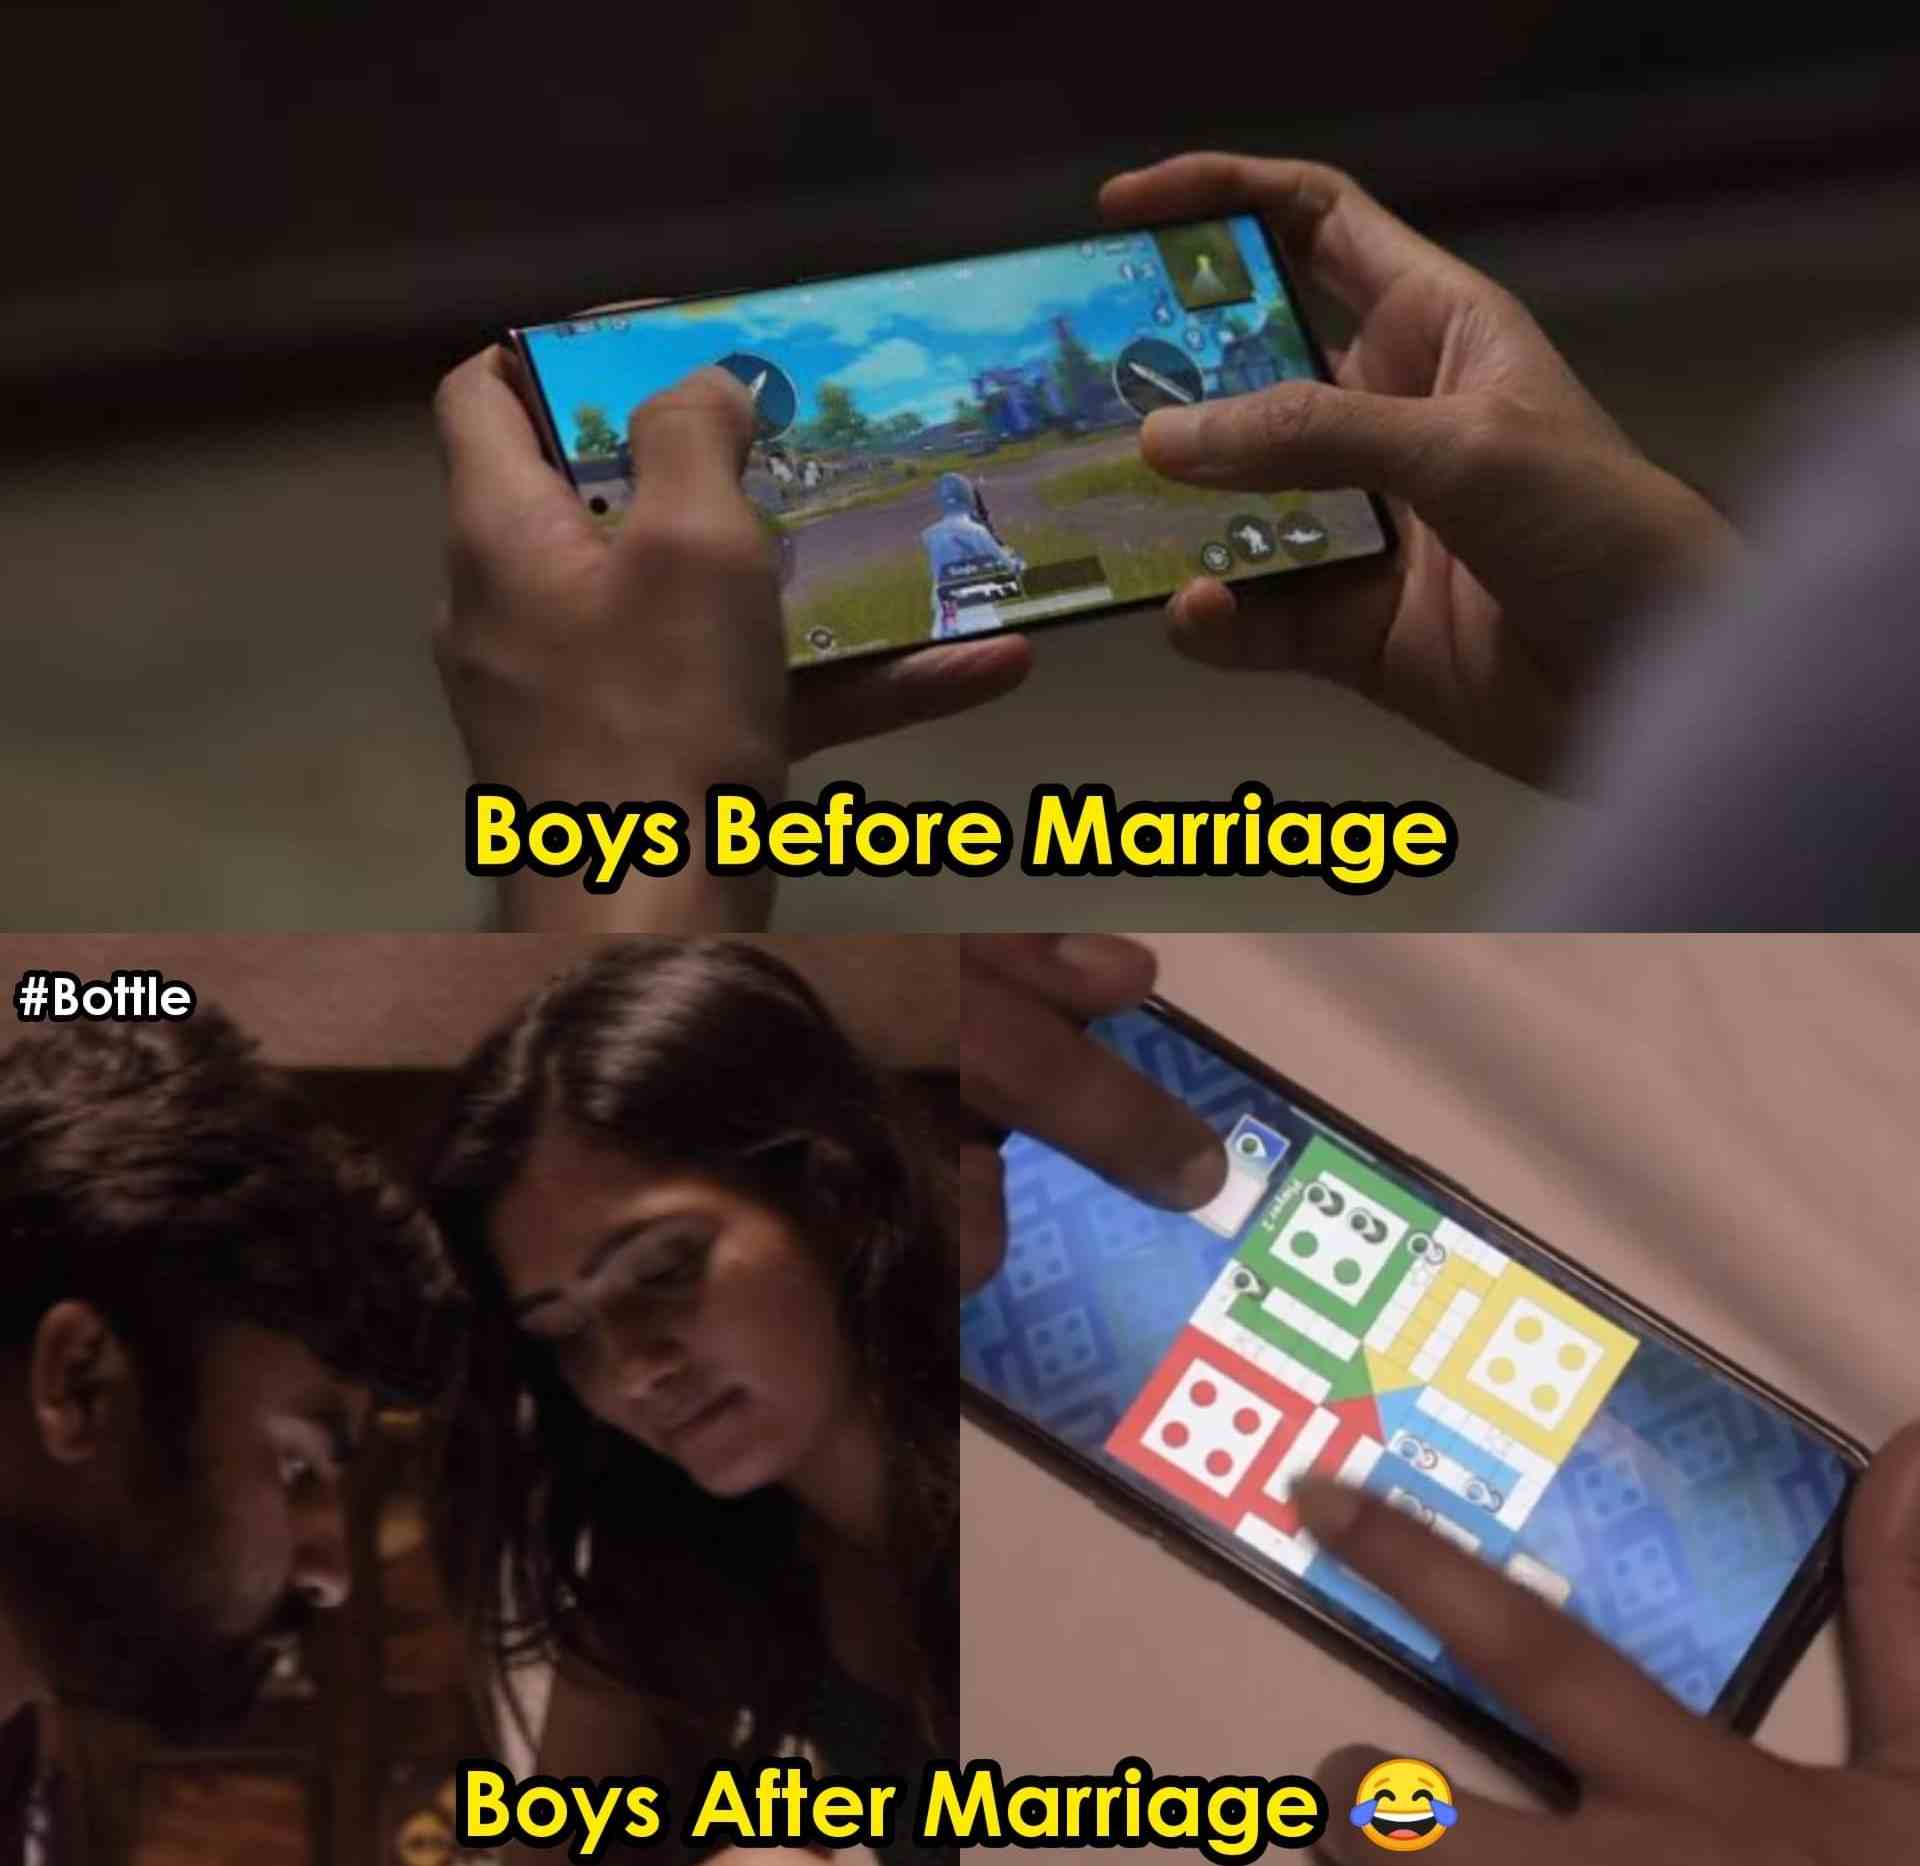 Boys Before Marriage vs Boys After Marriage